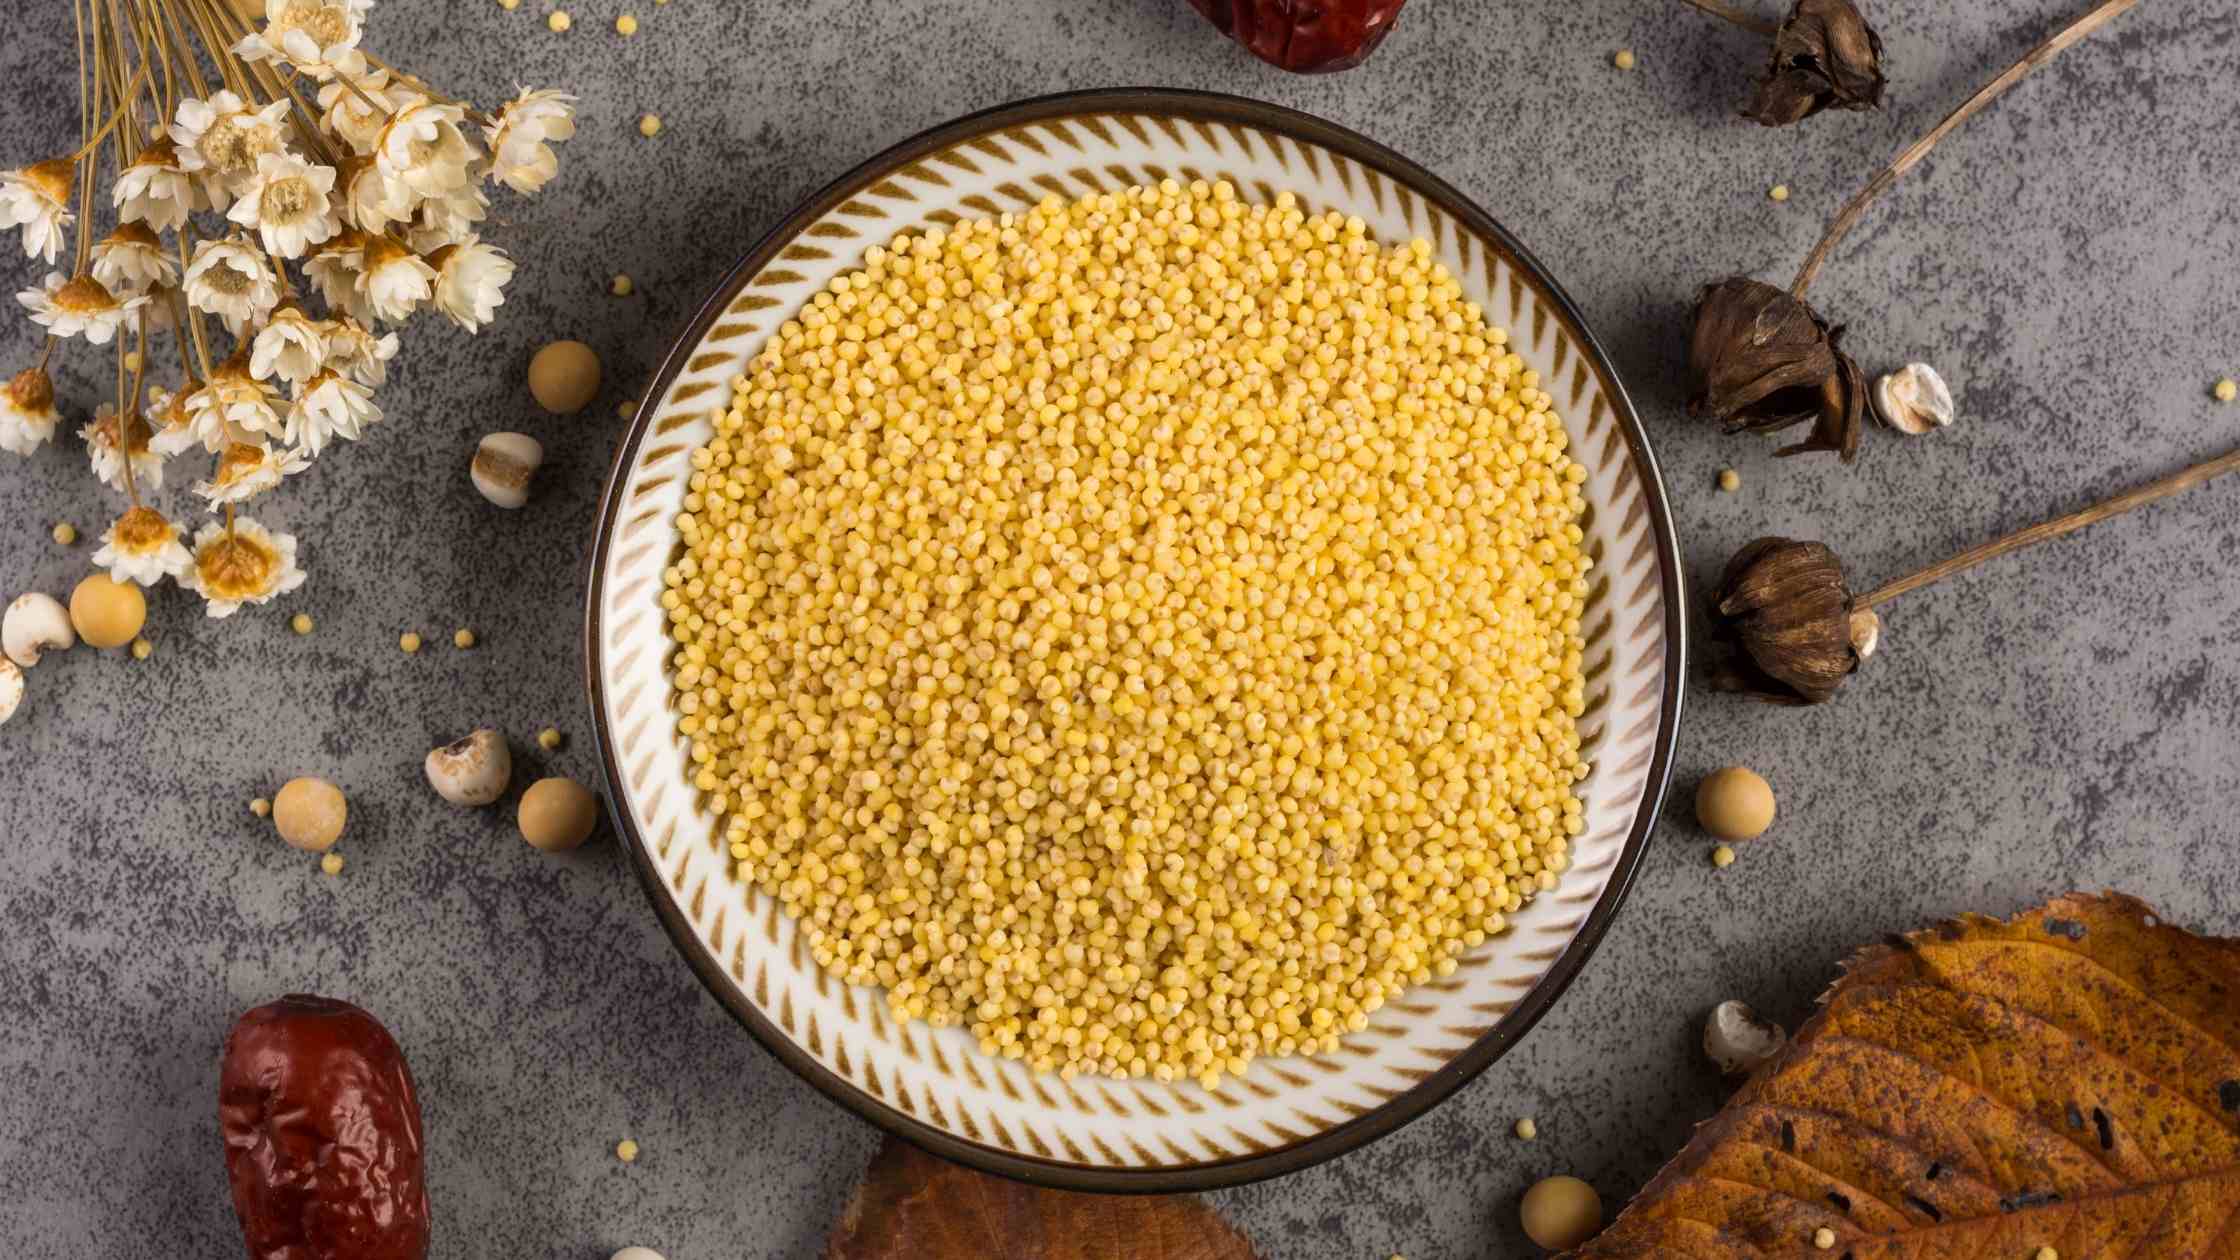 Know about Proso millets cultivation in india and their benefits